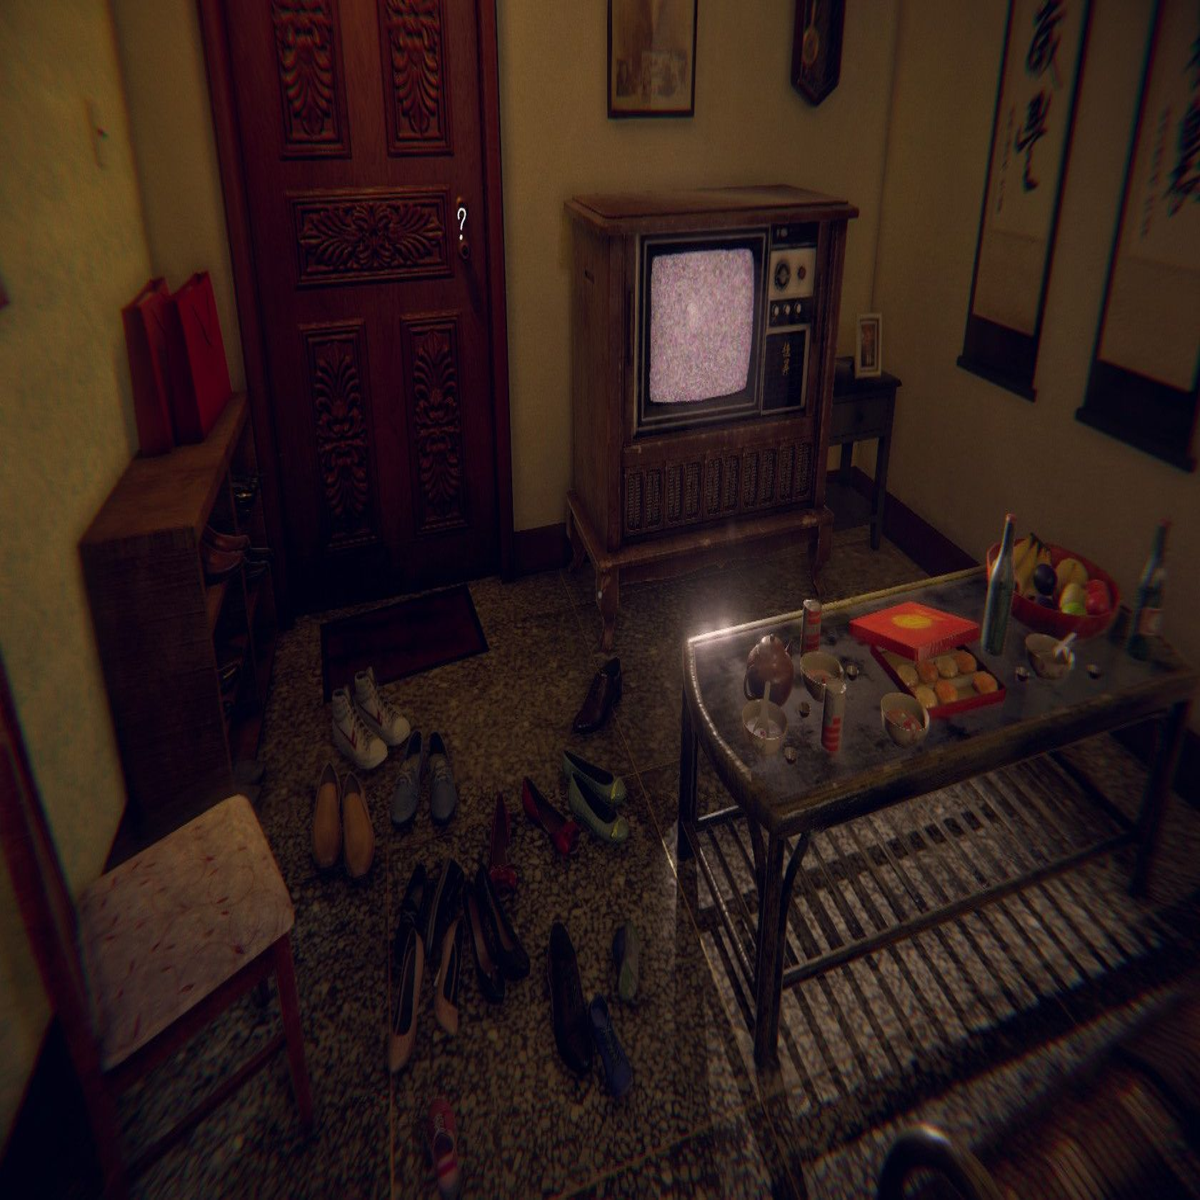 The making of Devotion, China's least favourite horror game